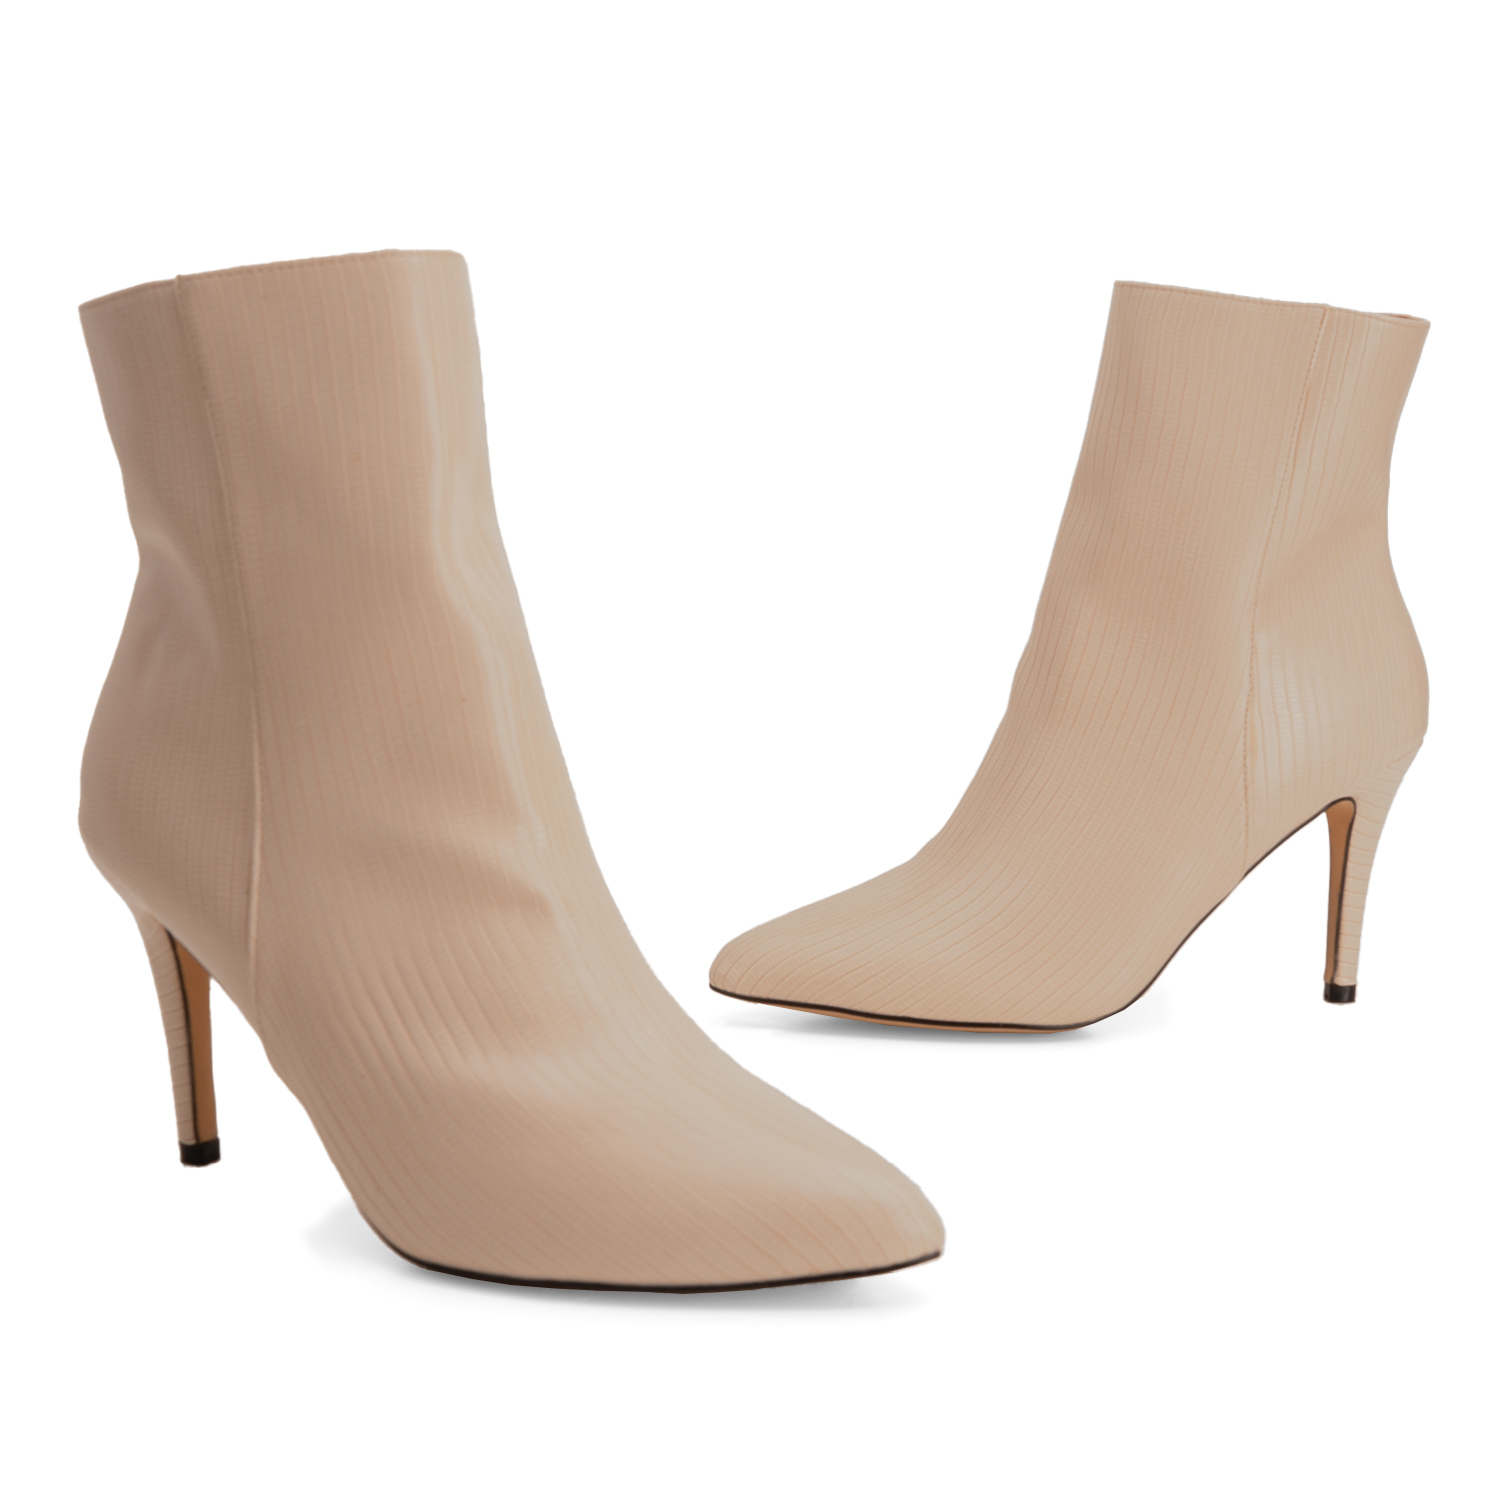 Pointed toed booties in ivory embossed faux leather 